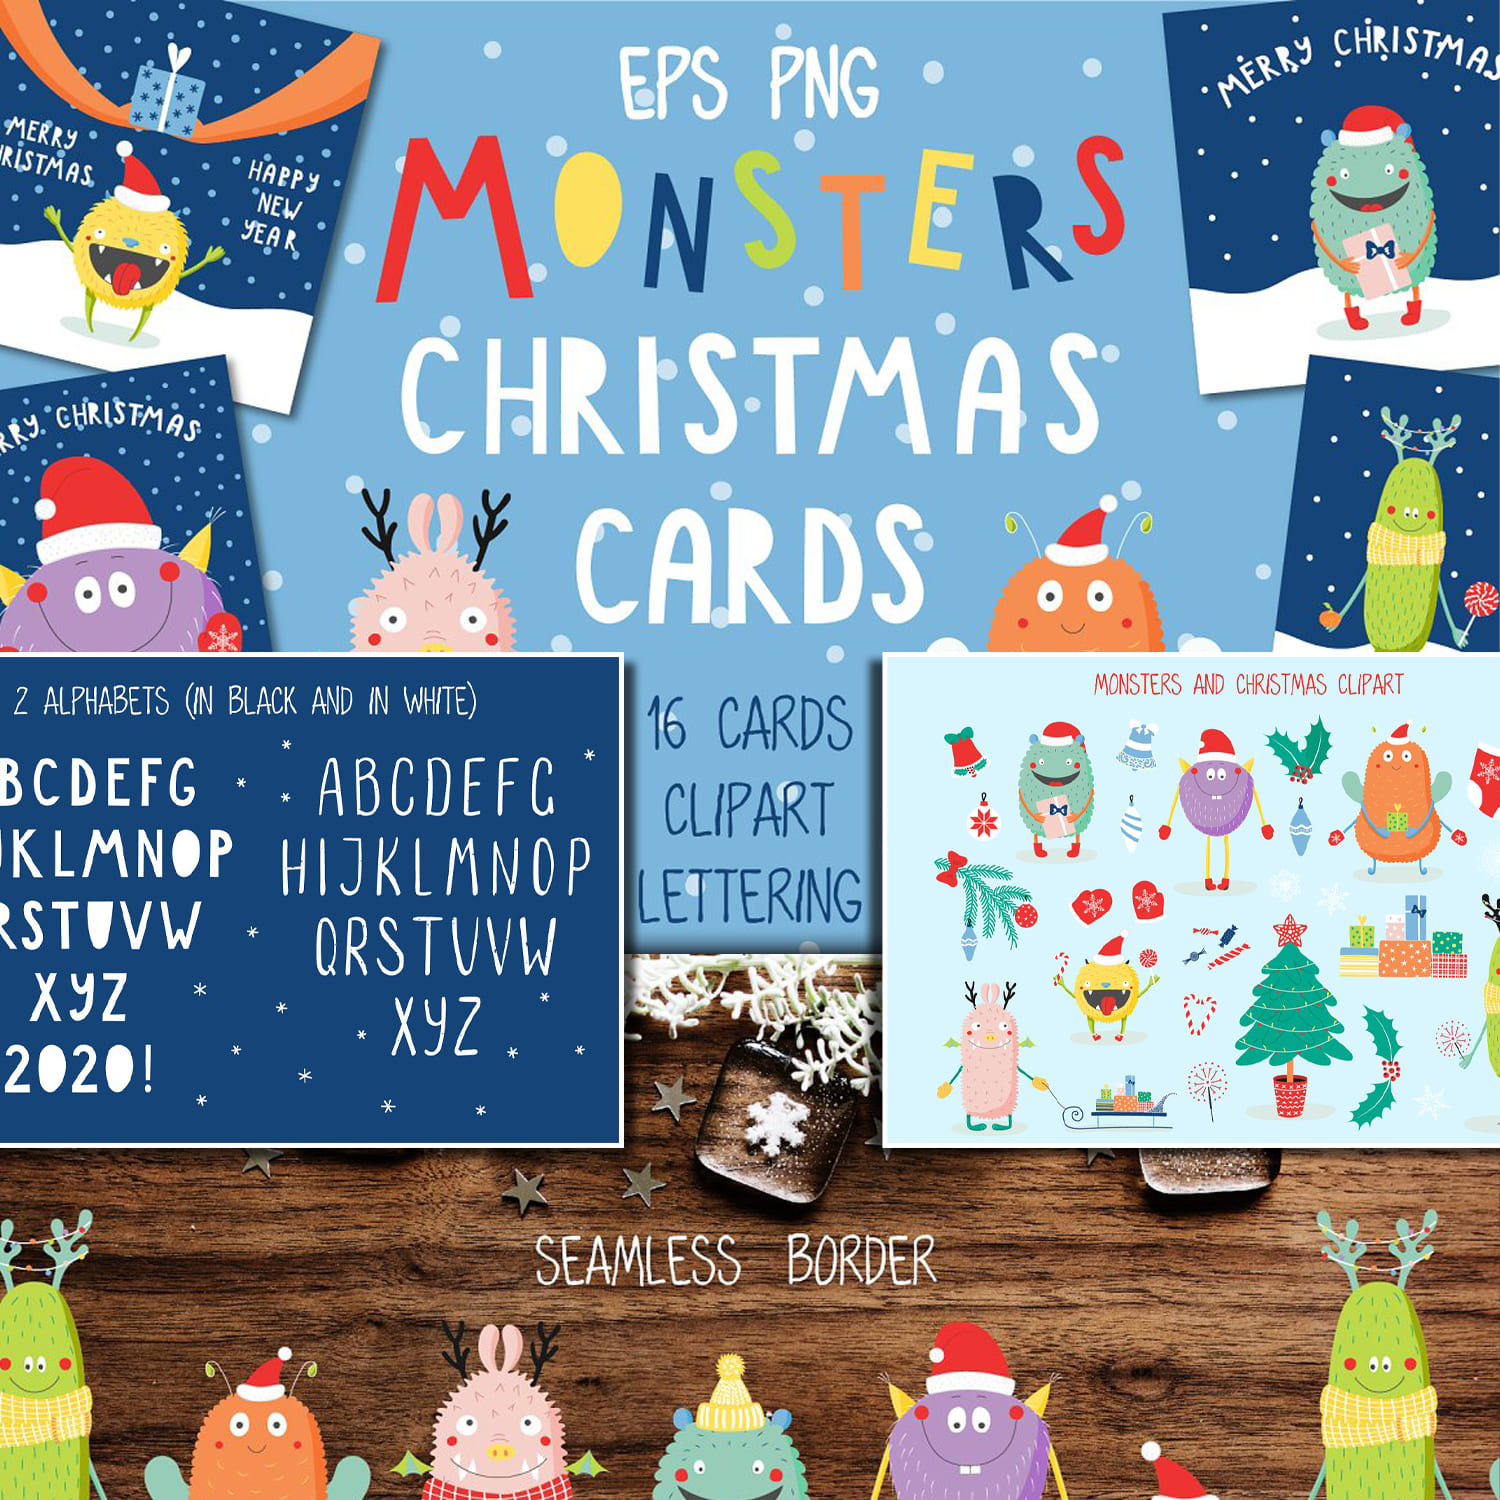 Cute Monsters Christmas Cards cover.